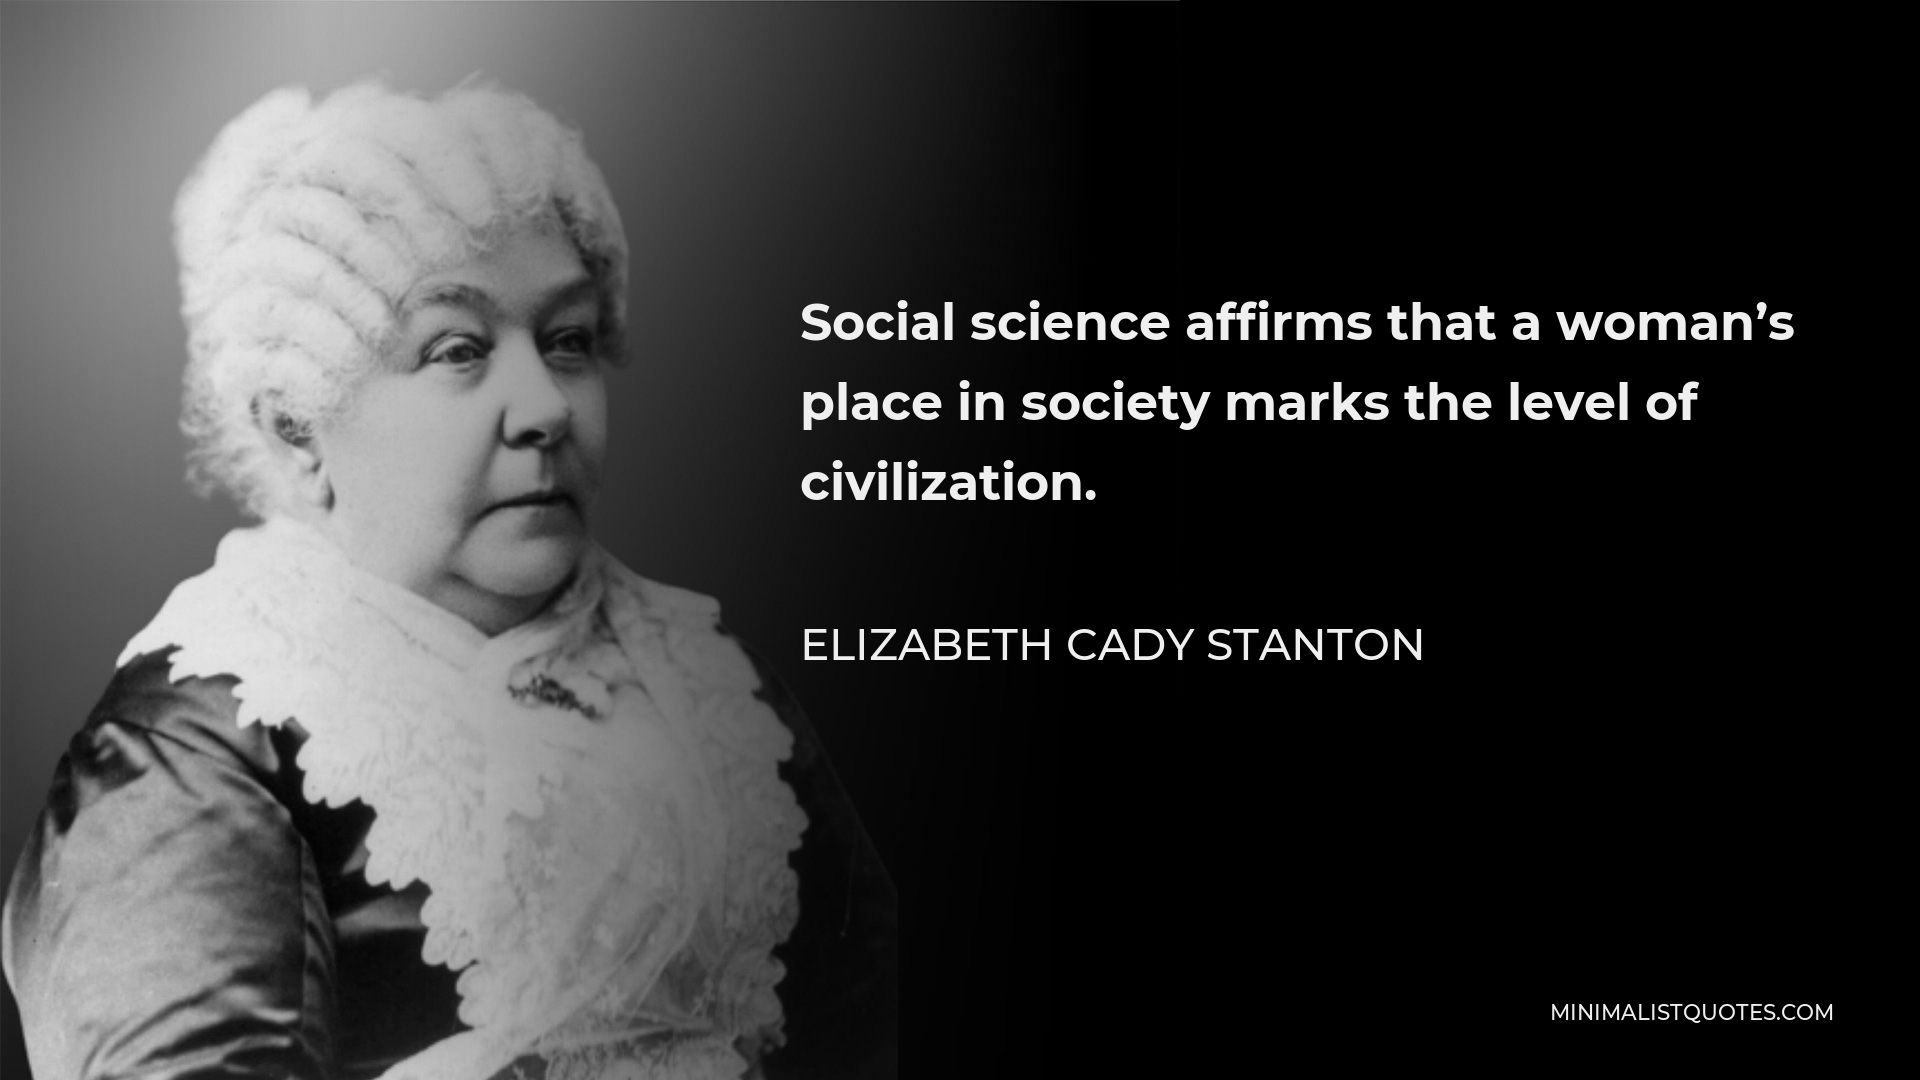 Elizabeth Cady Stanton Quote - Social science affirms that a woman’s place in society marks the level of civilization.